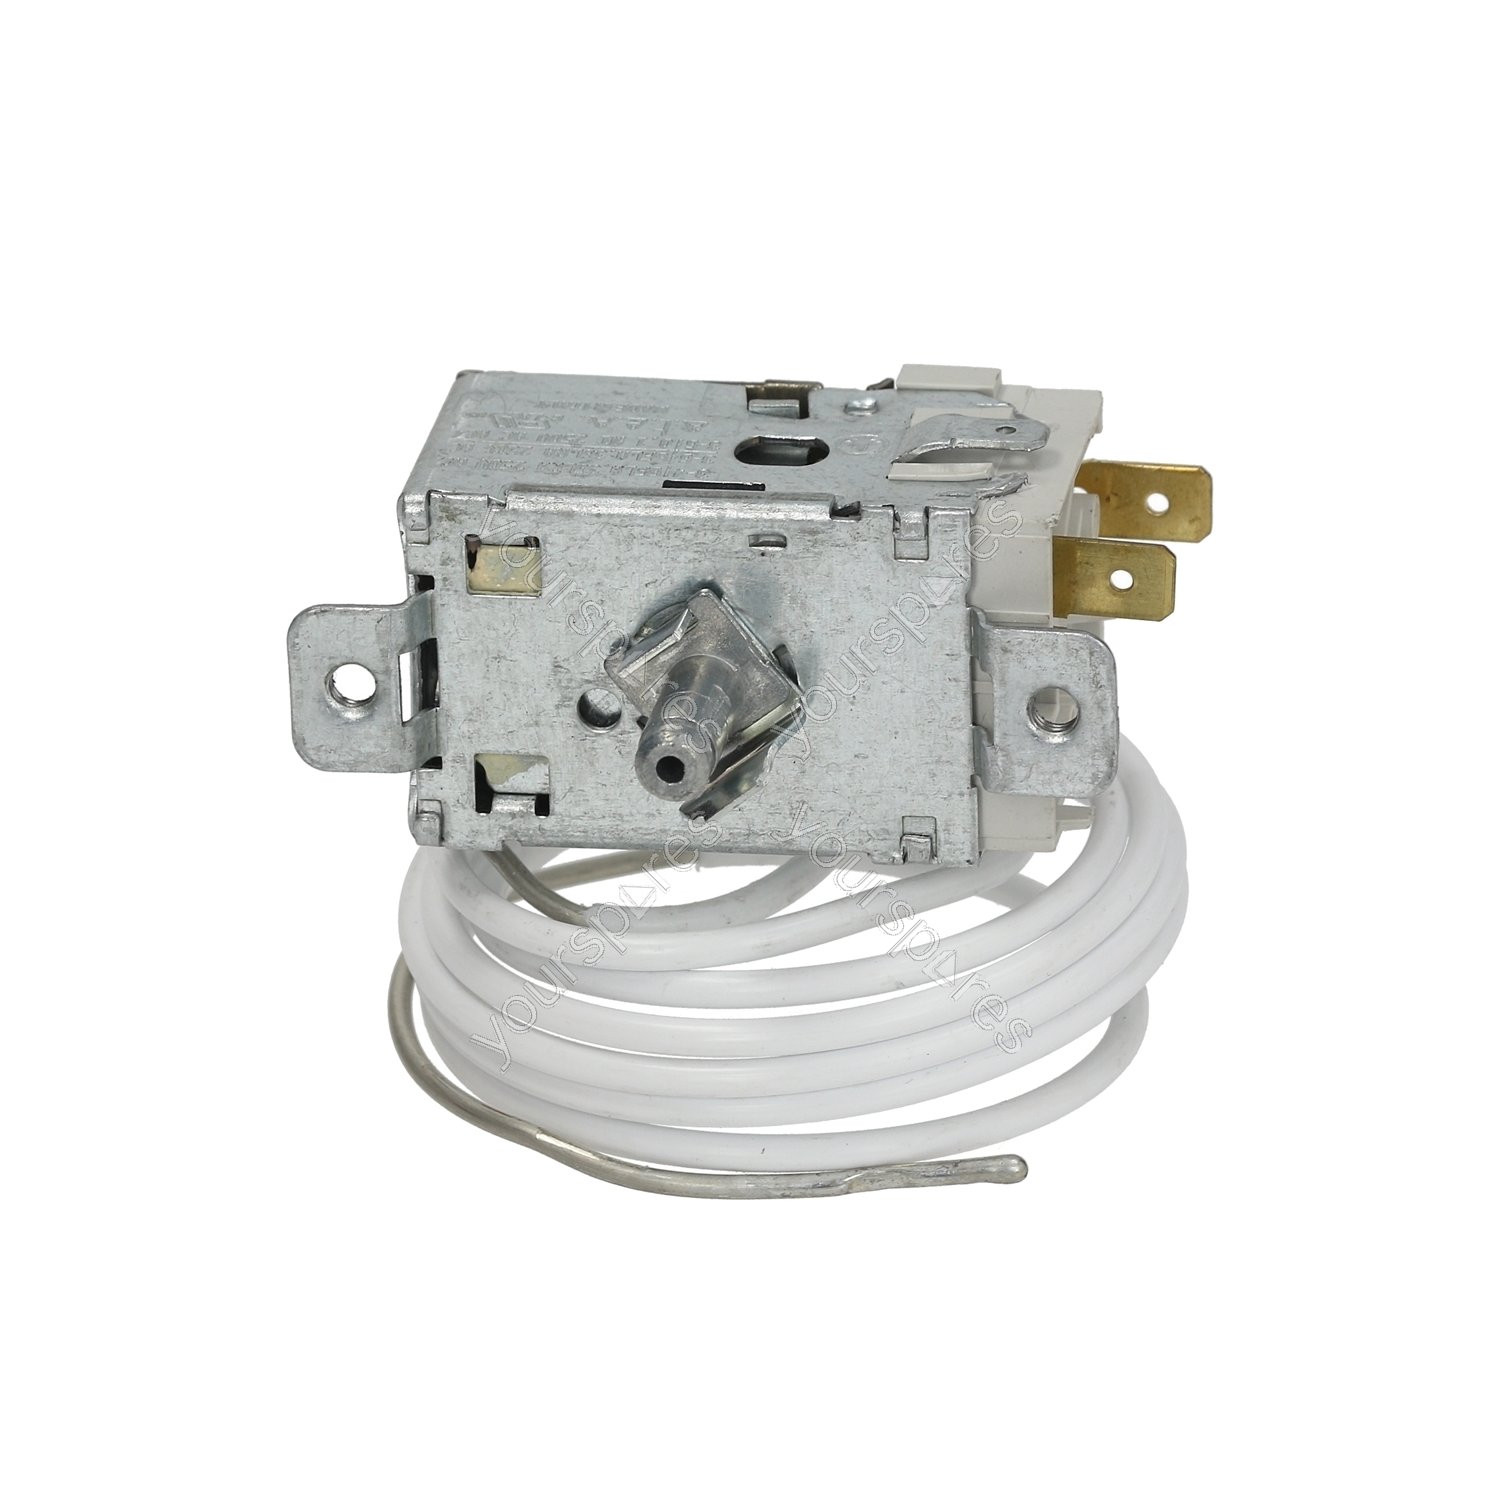 THERMOSTAT A03 0222,2P 2C, tube capillaire 1200mm PVC chaud 13,1/+2,8, froid -22,3/+2,8°C broche ø 6 mm